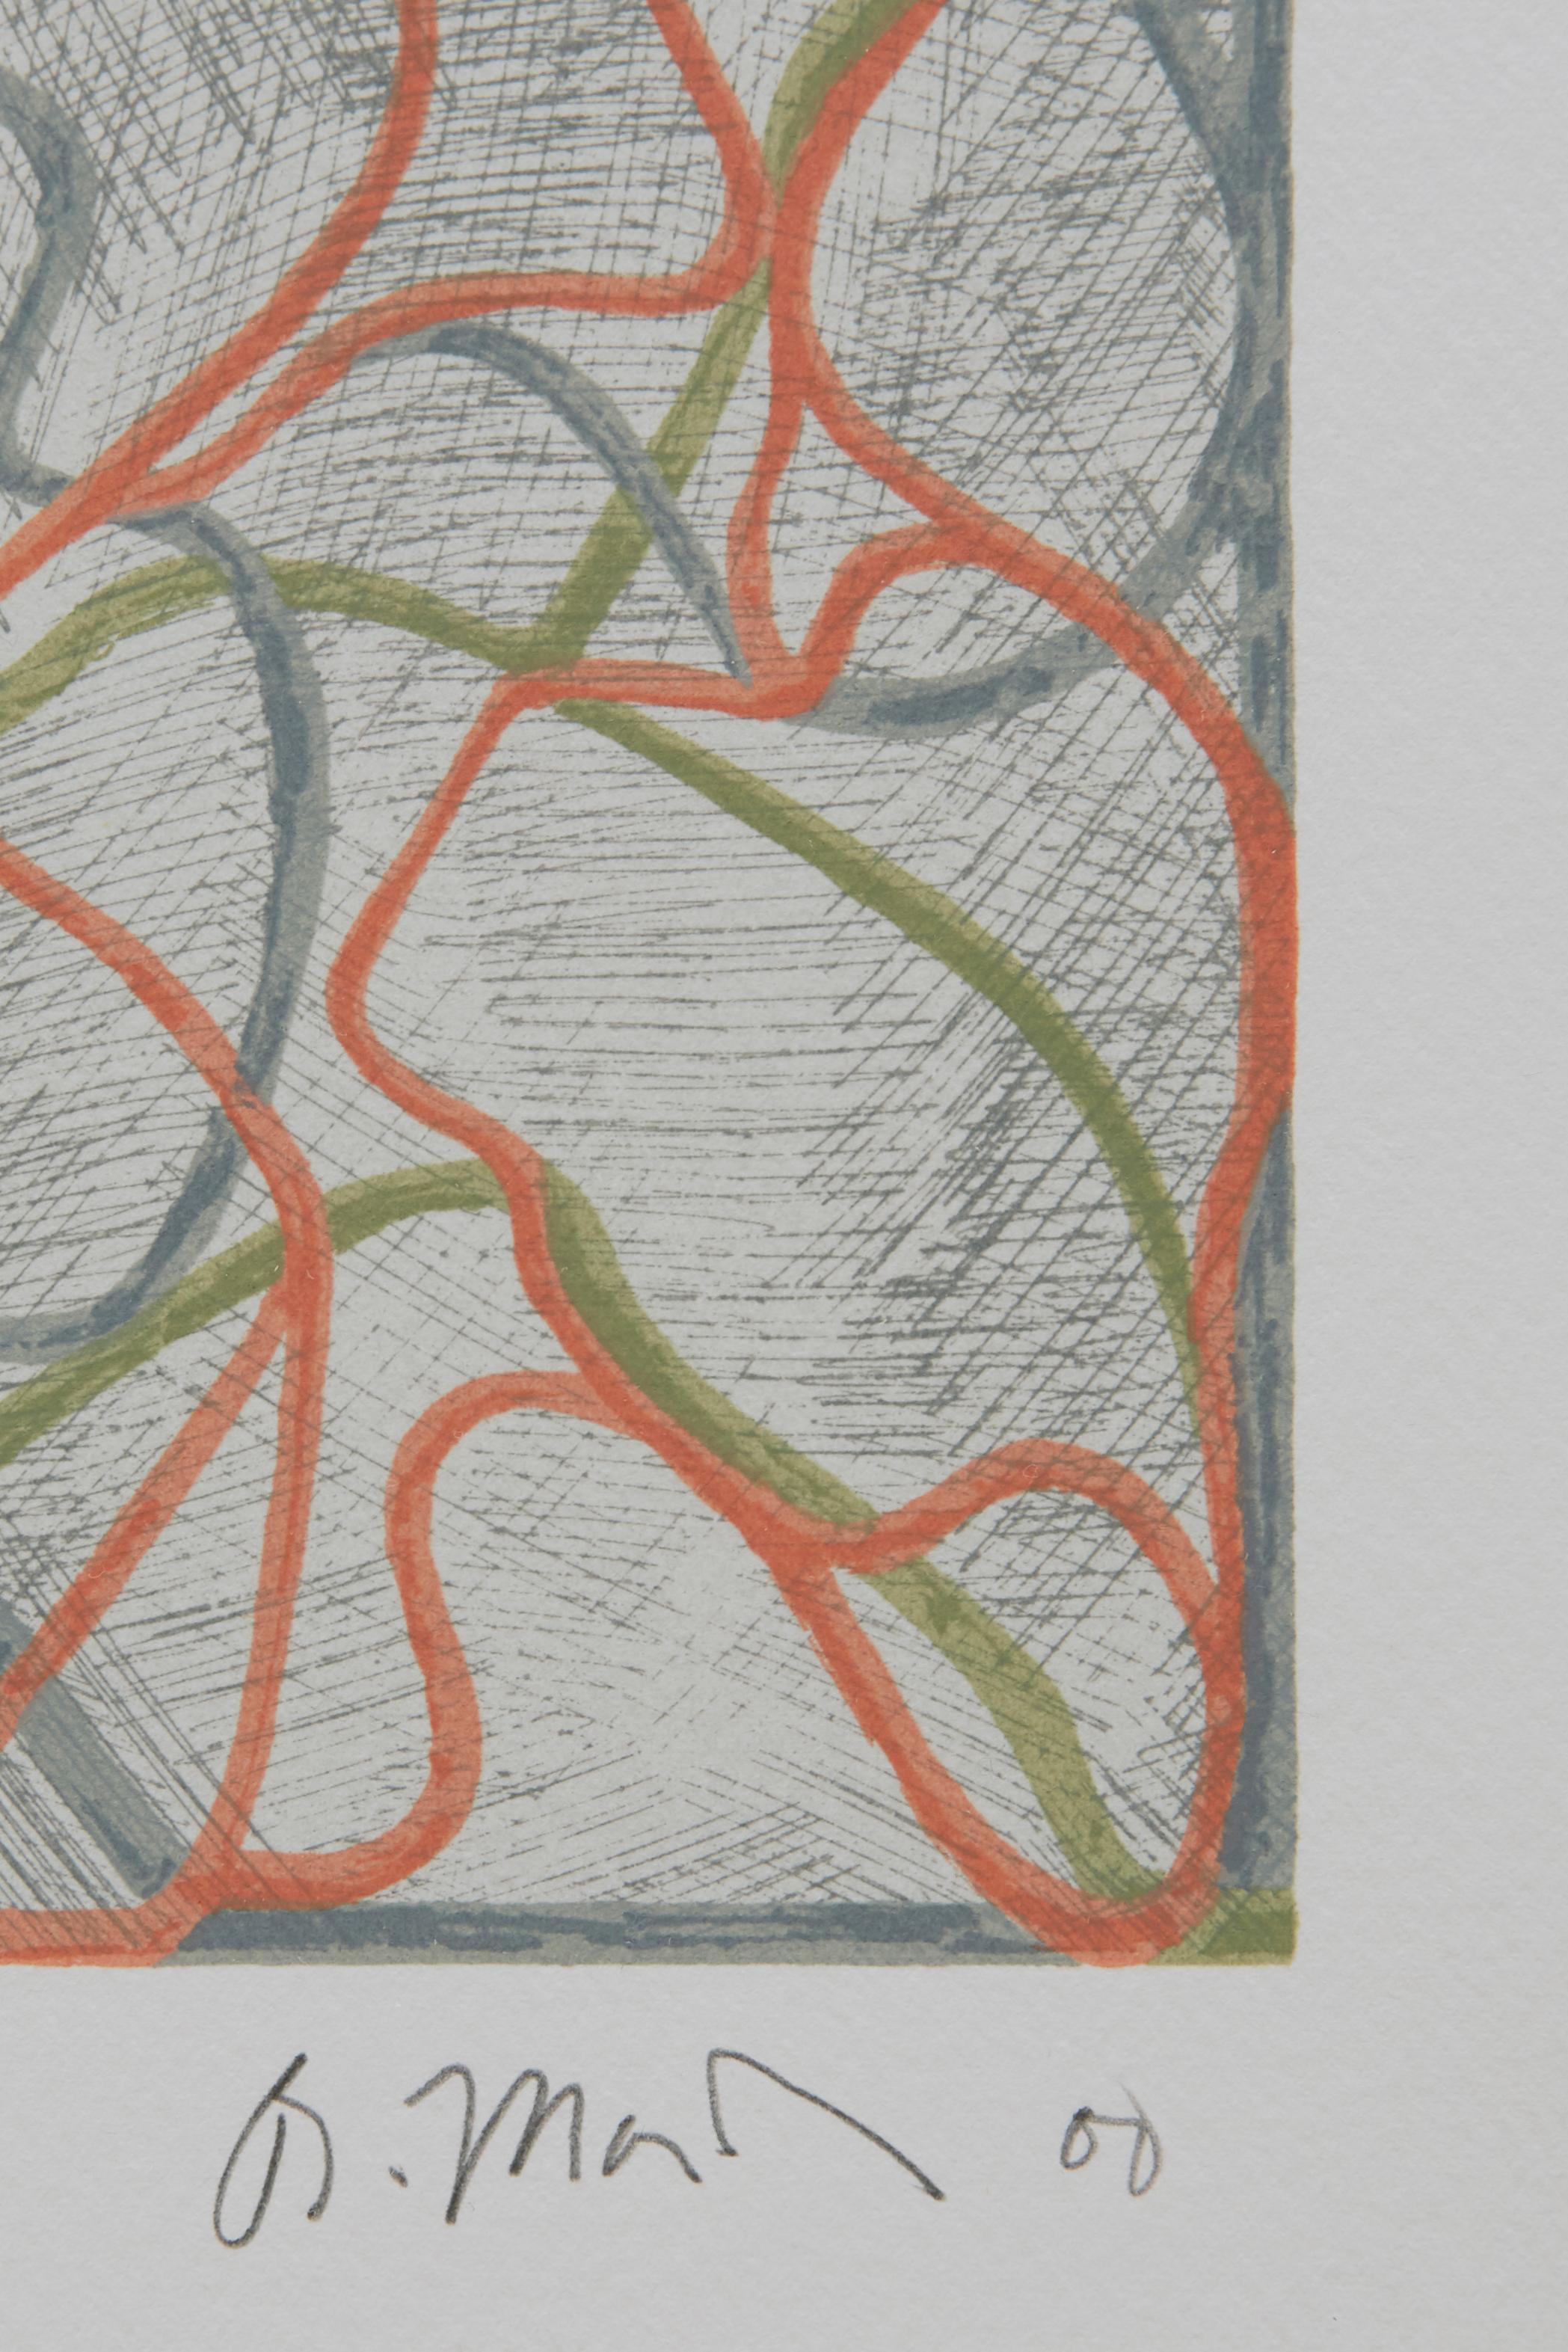 Distant Muses - Contemporary Print by Brice Marden